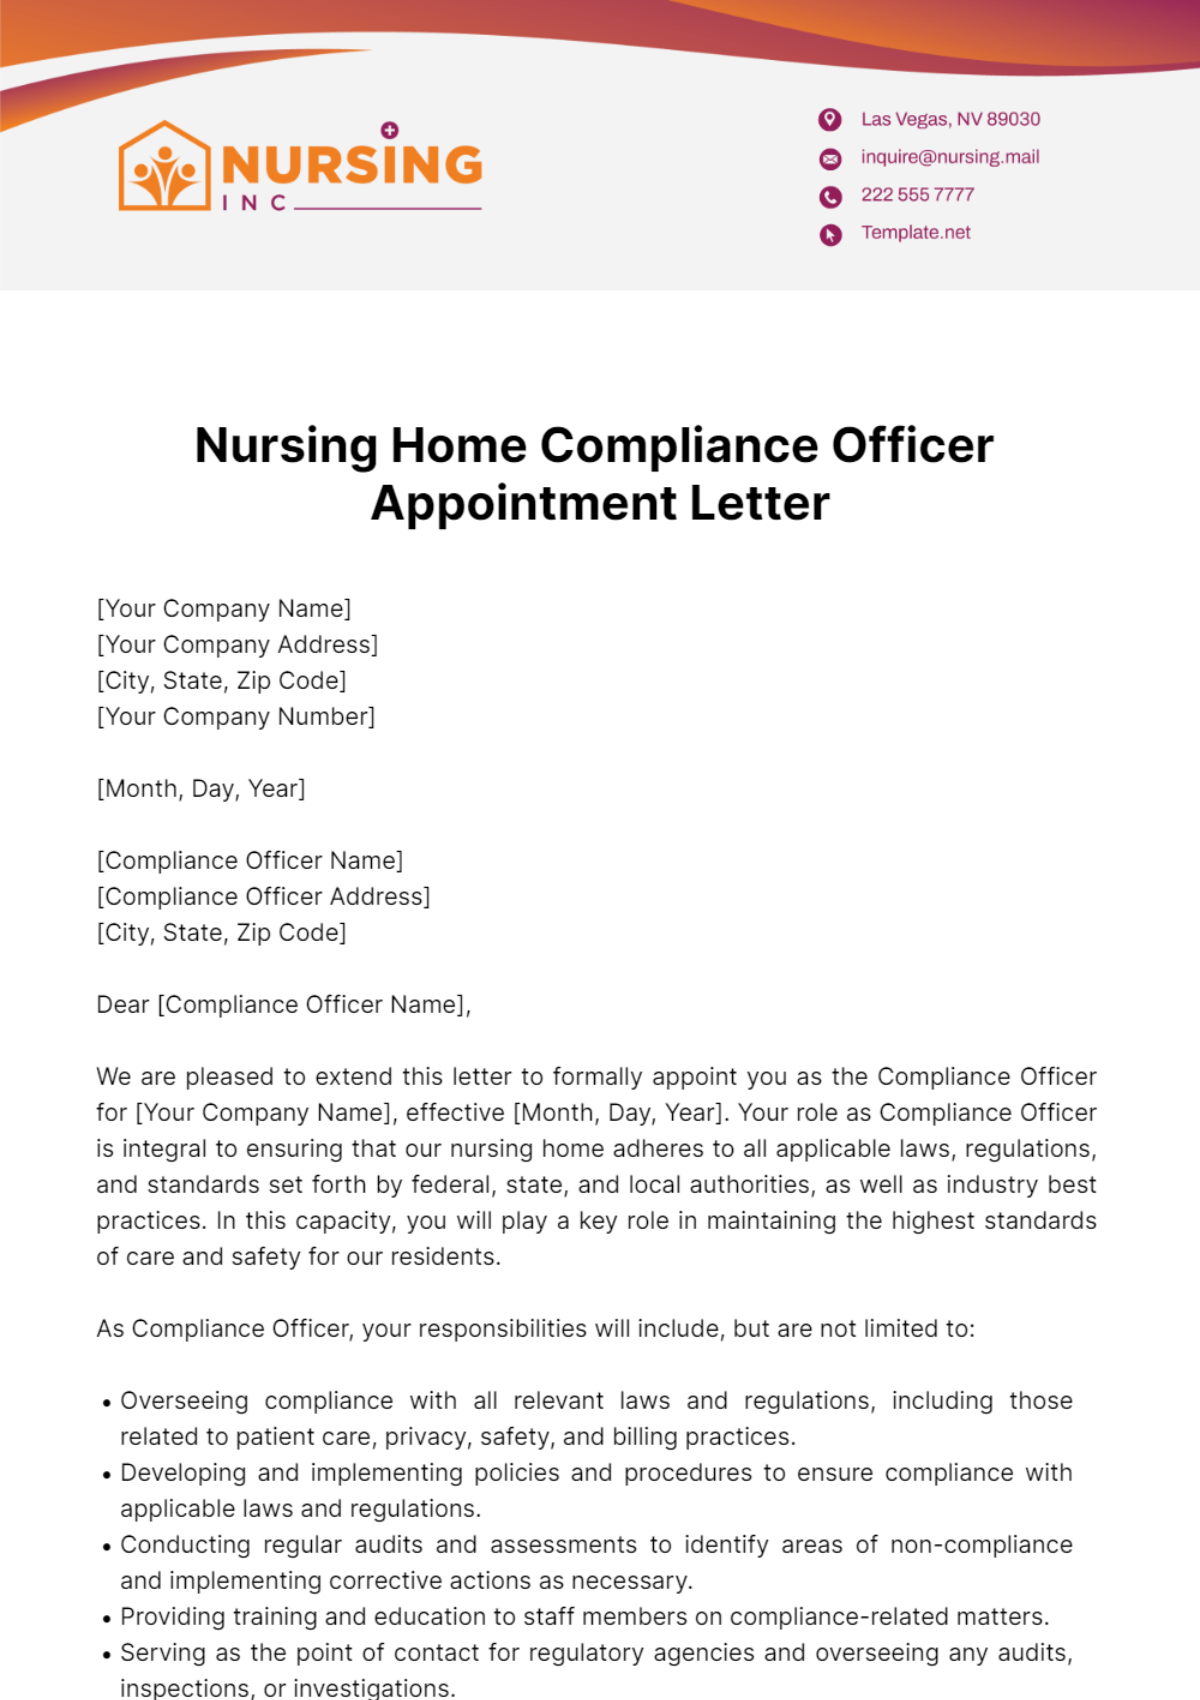 Nursing Home Compliance Officer Appointment Letter Template